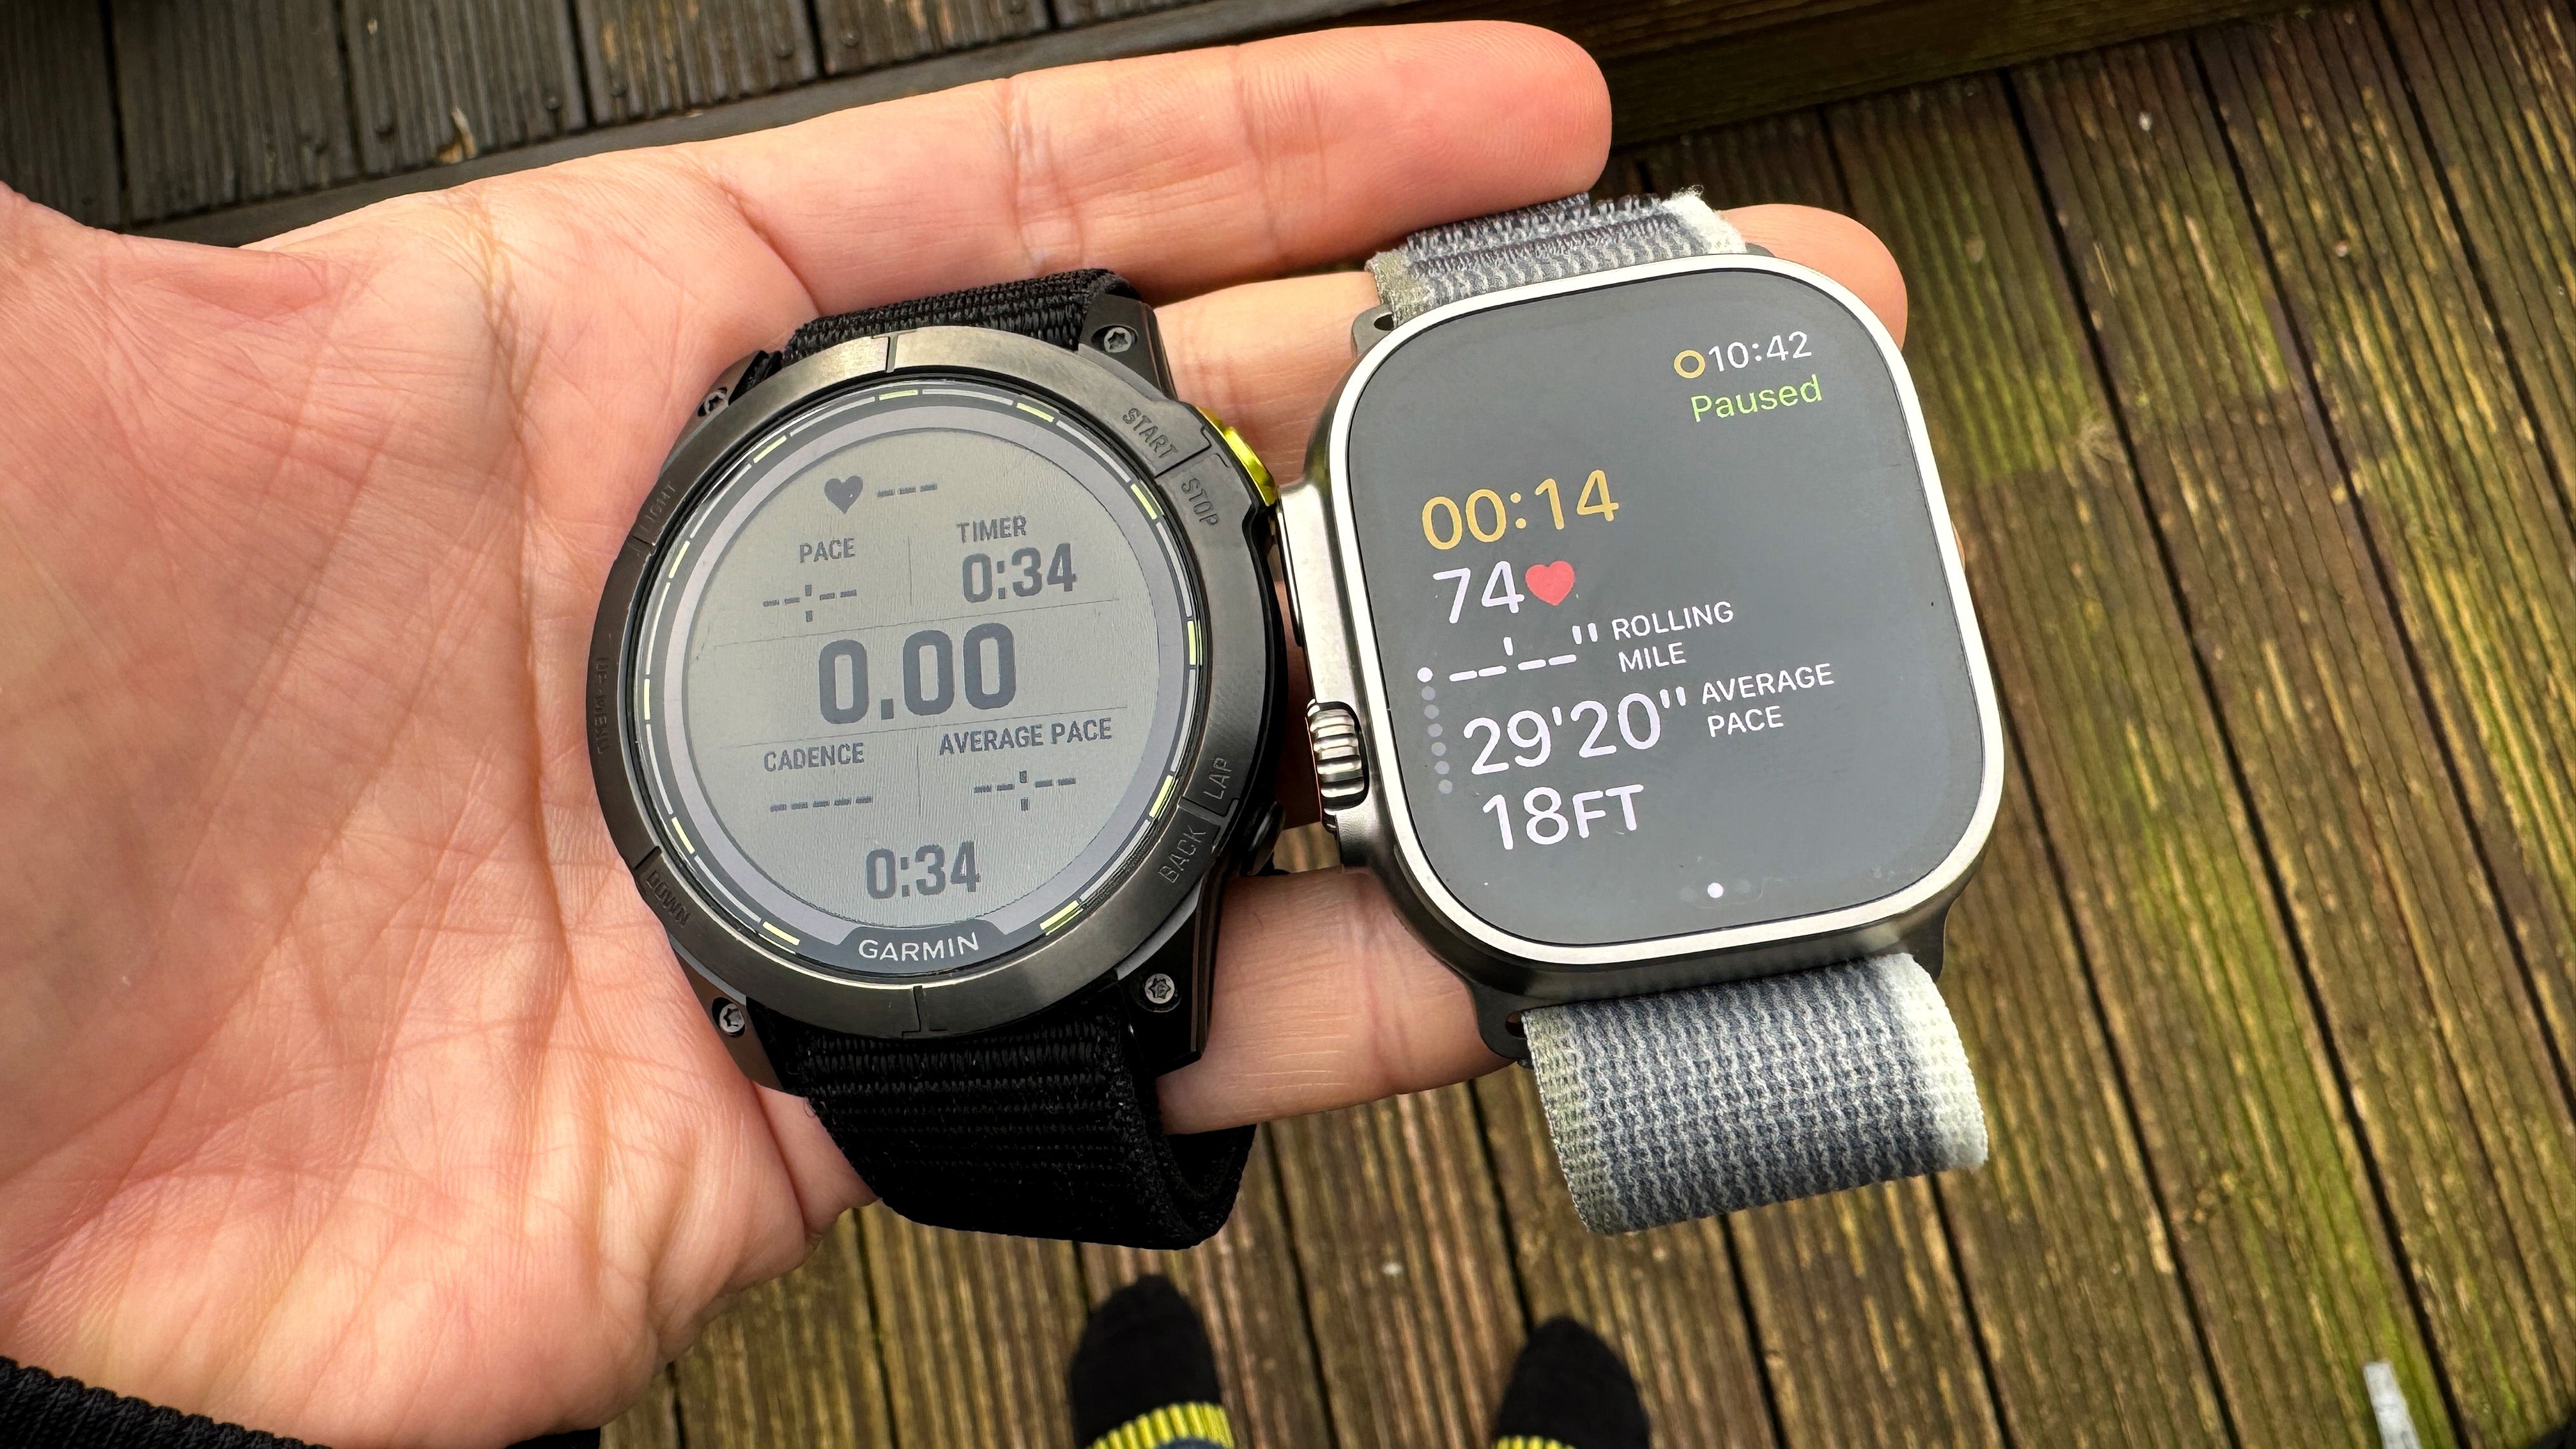 Best Garmin watch 2023: Tested and compared - Wareable